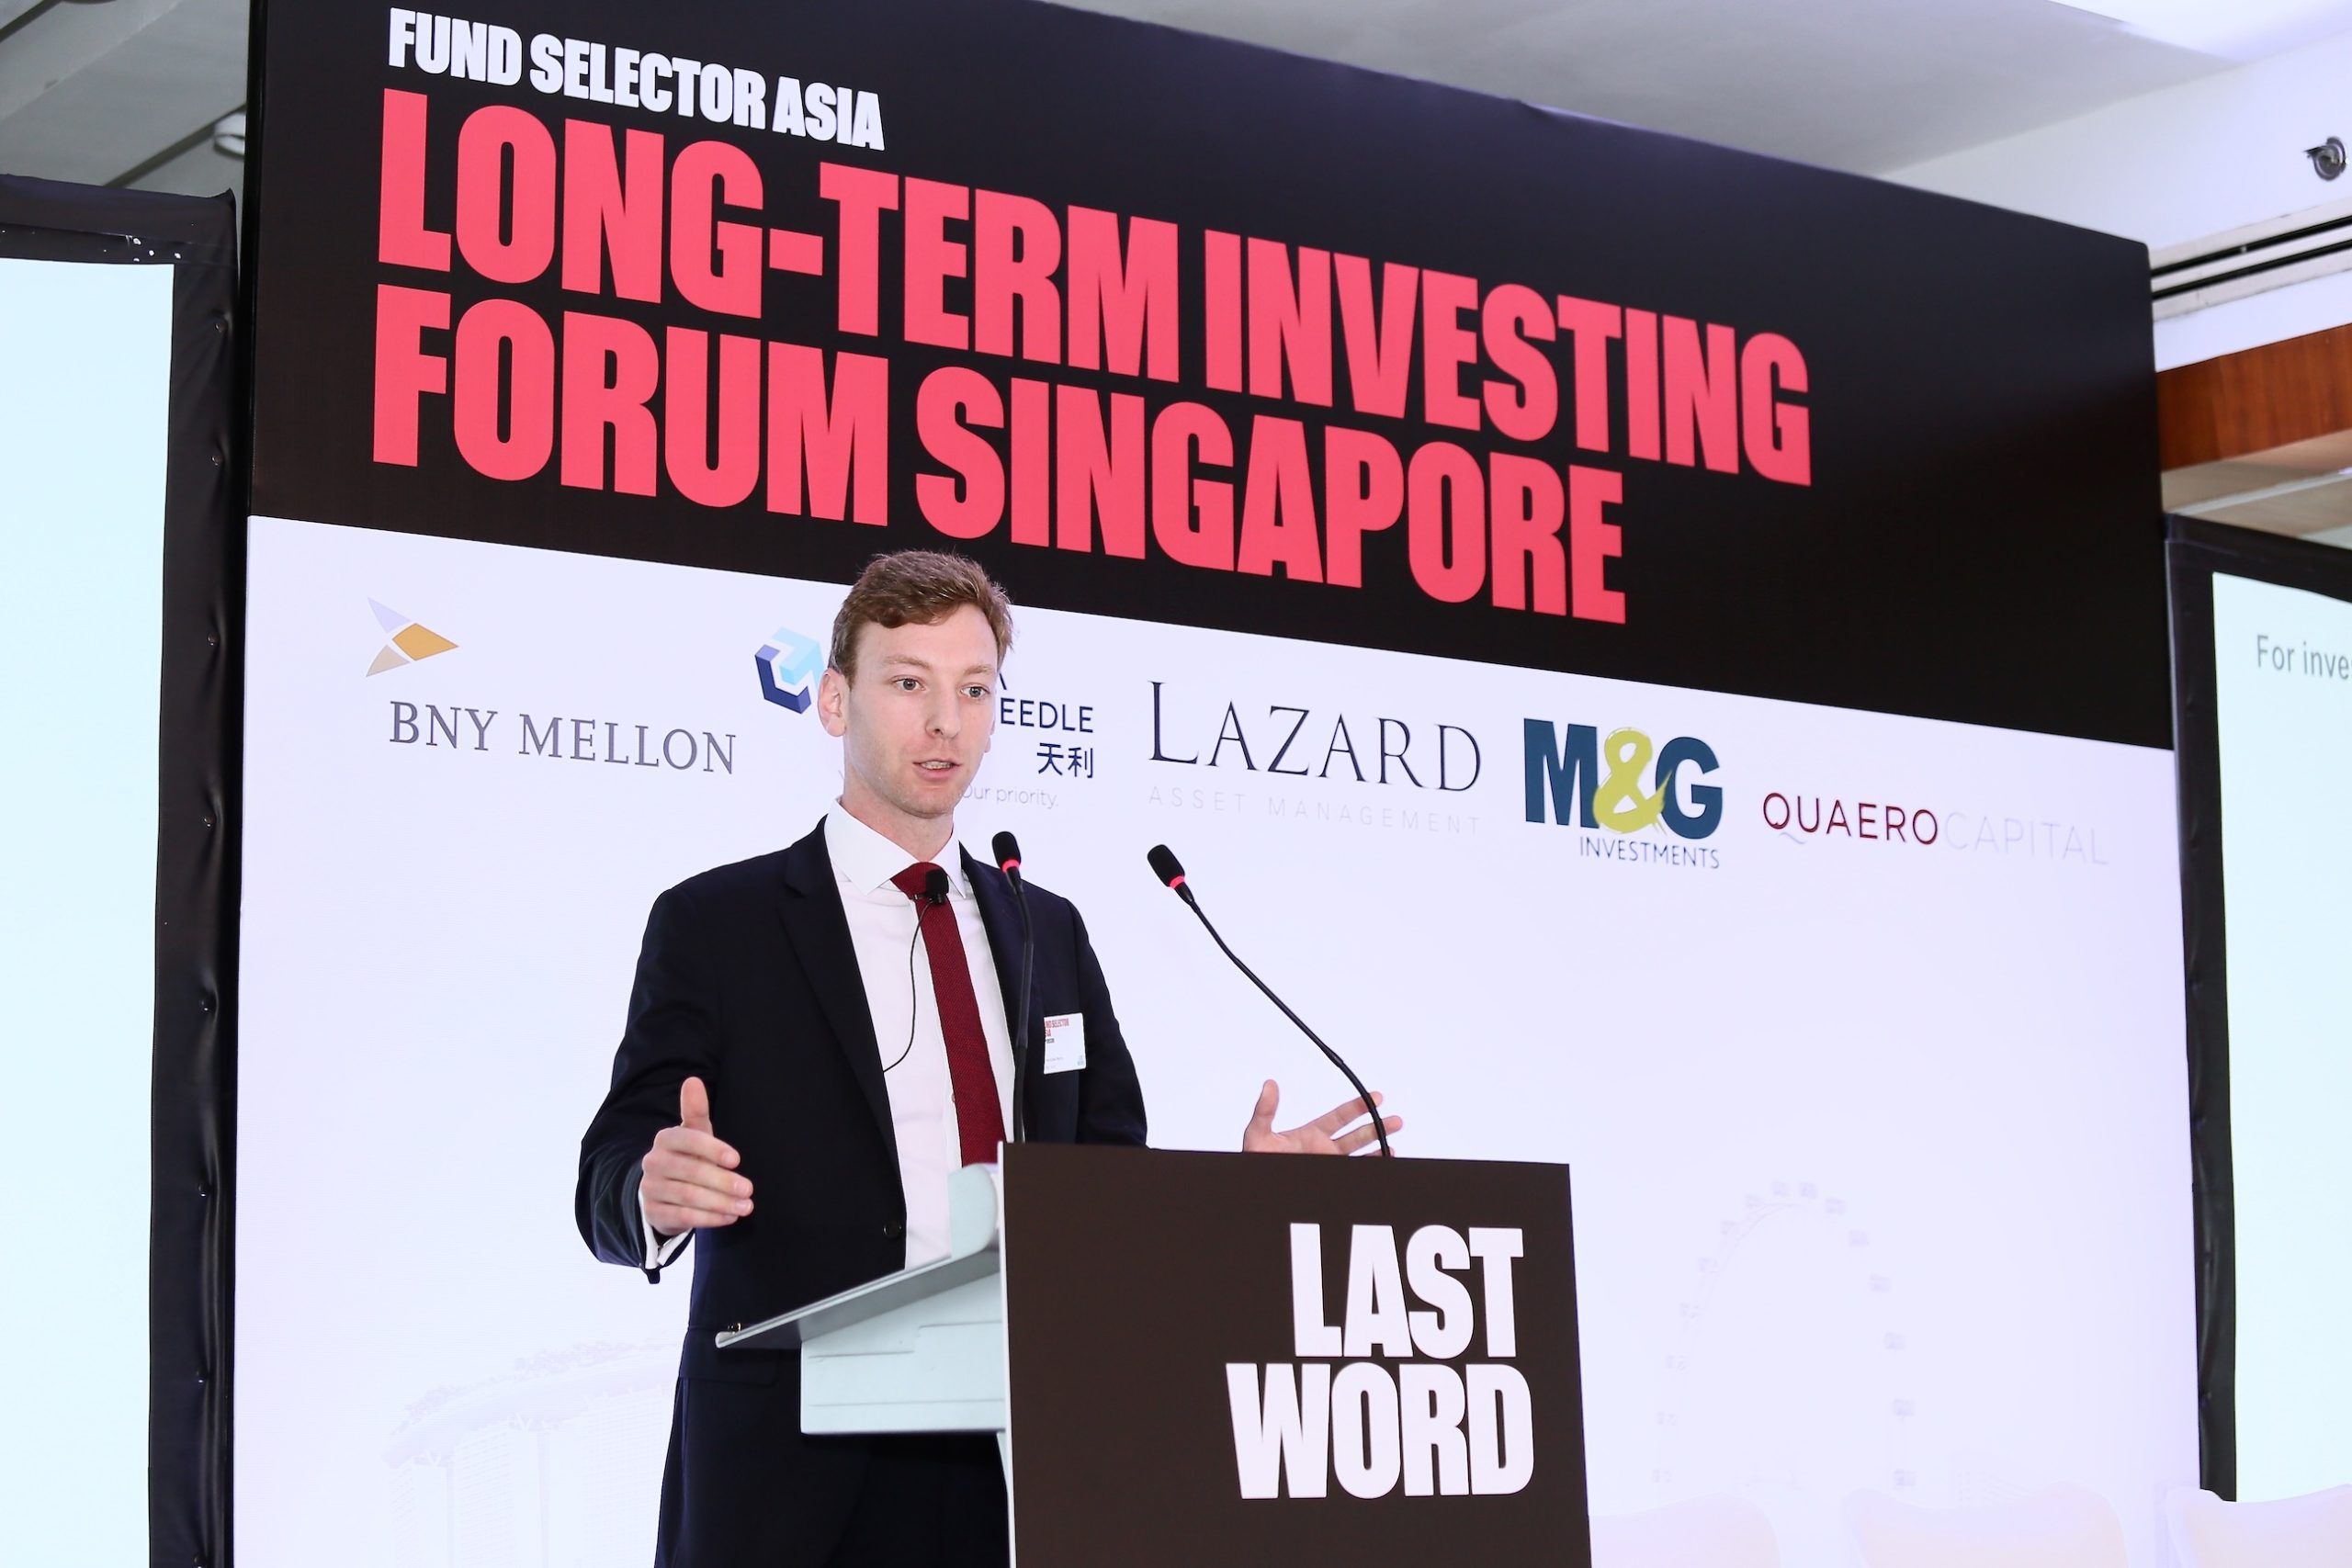 Presentation by Christophe Machu, investment specialist,
M&G Investments